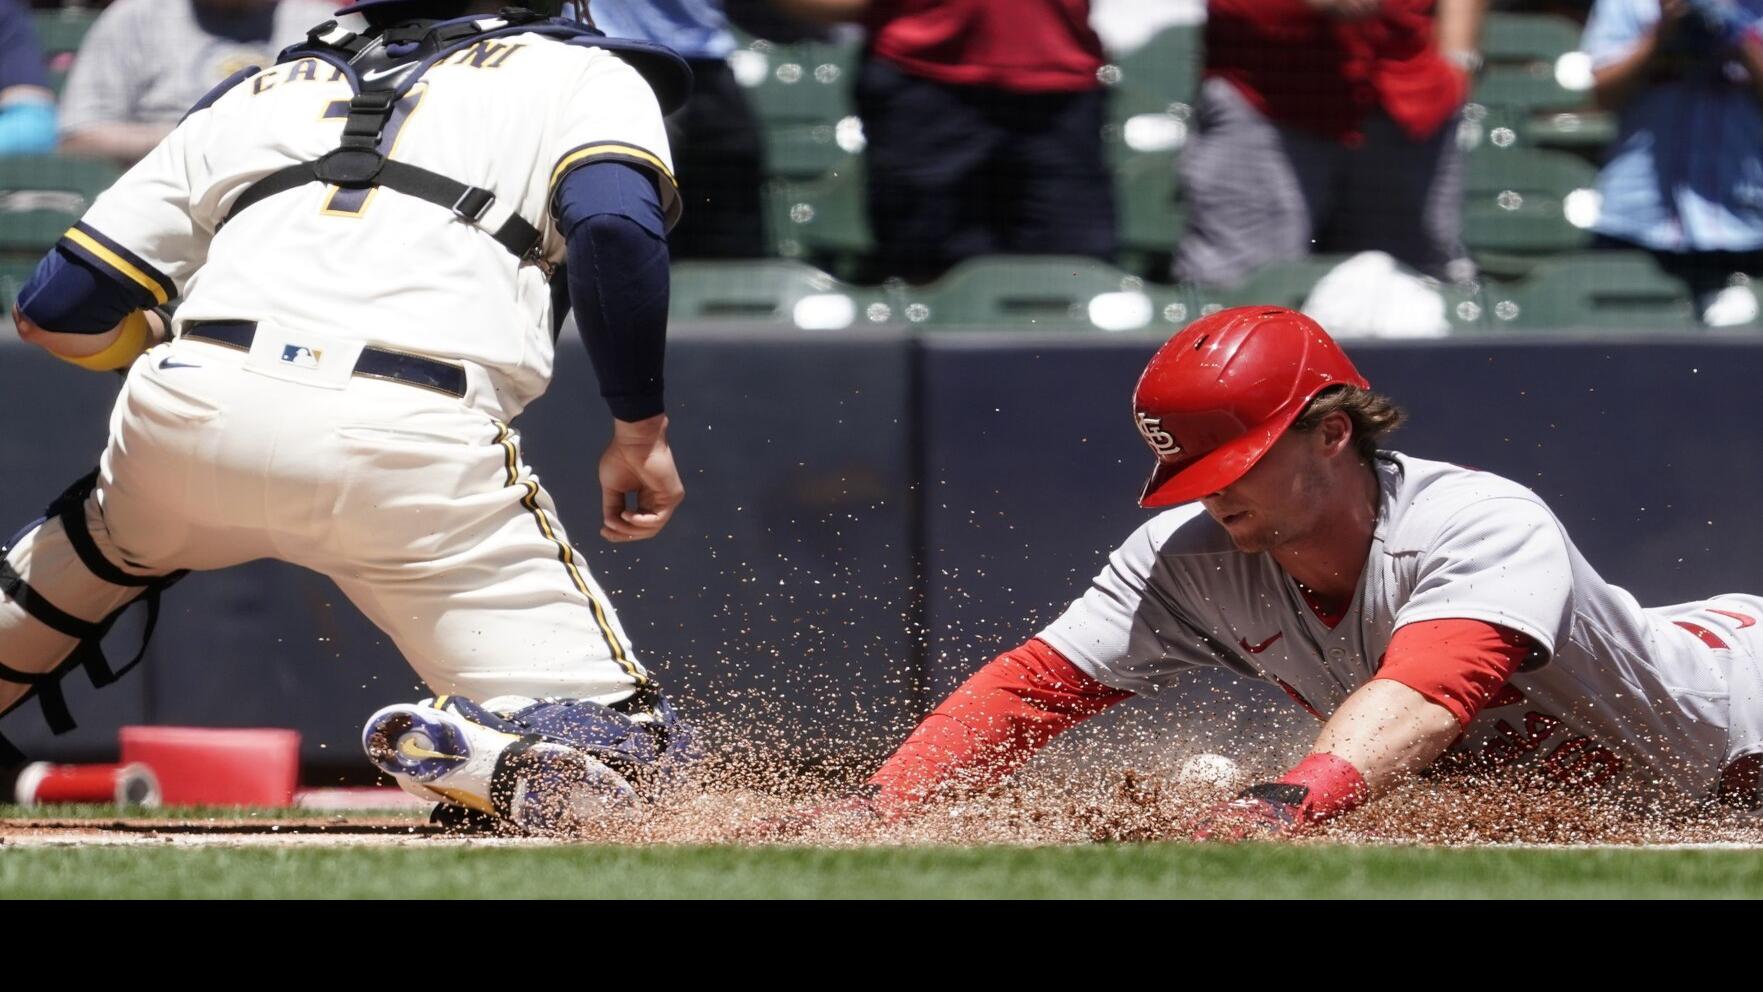 Standings remain the same, but changes afoot for Cardinals after loss to Brewers